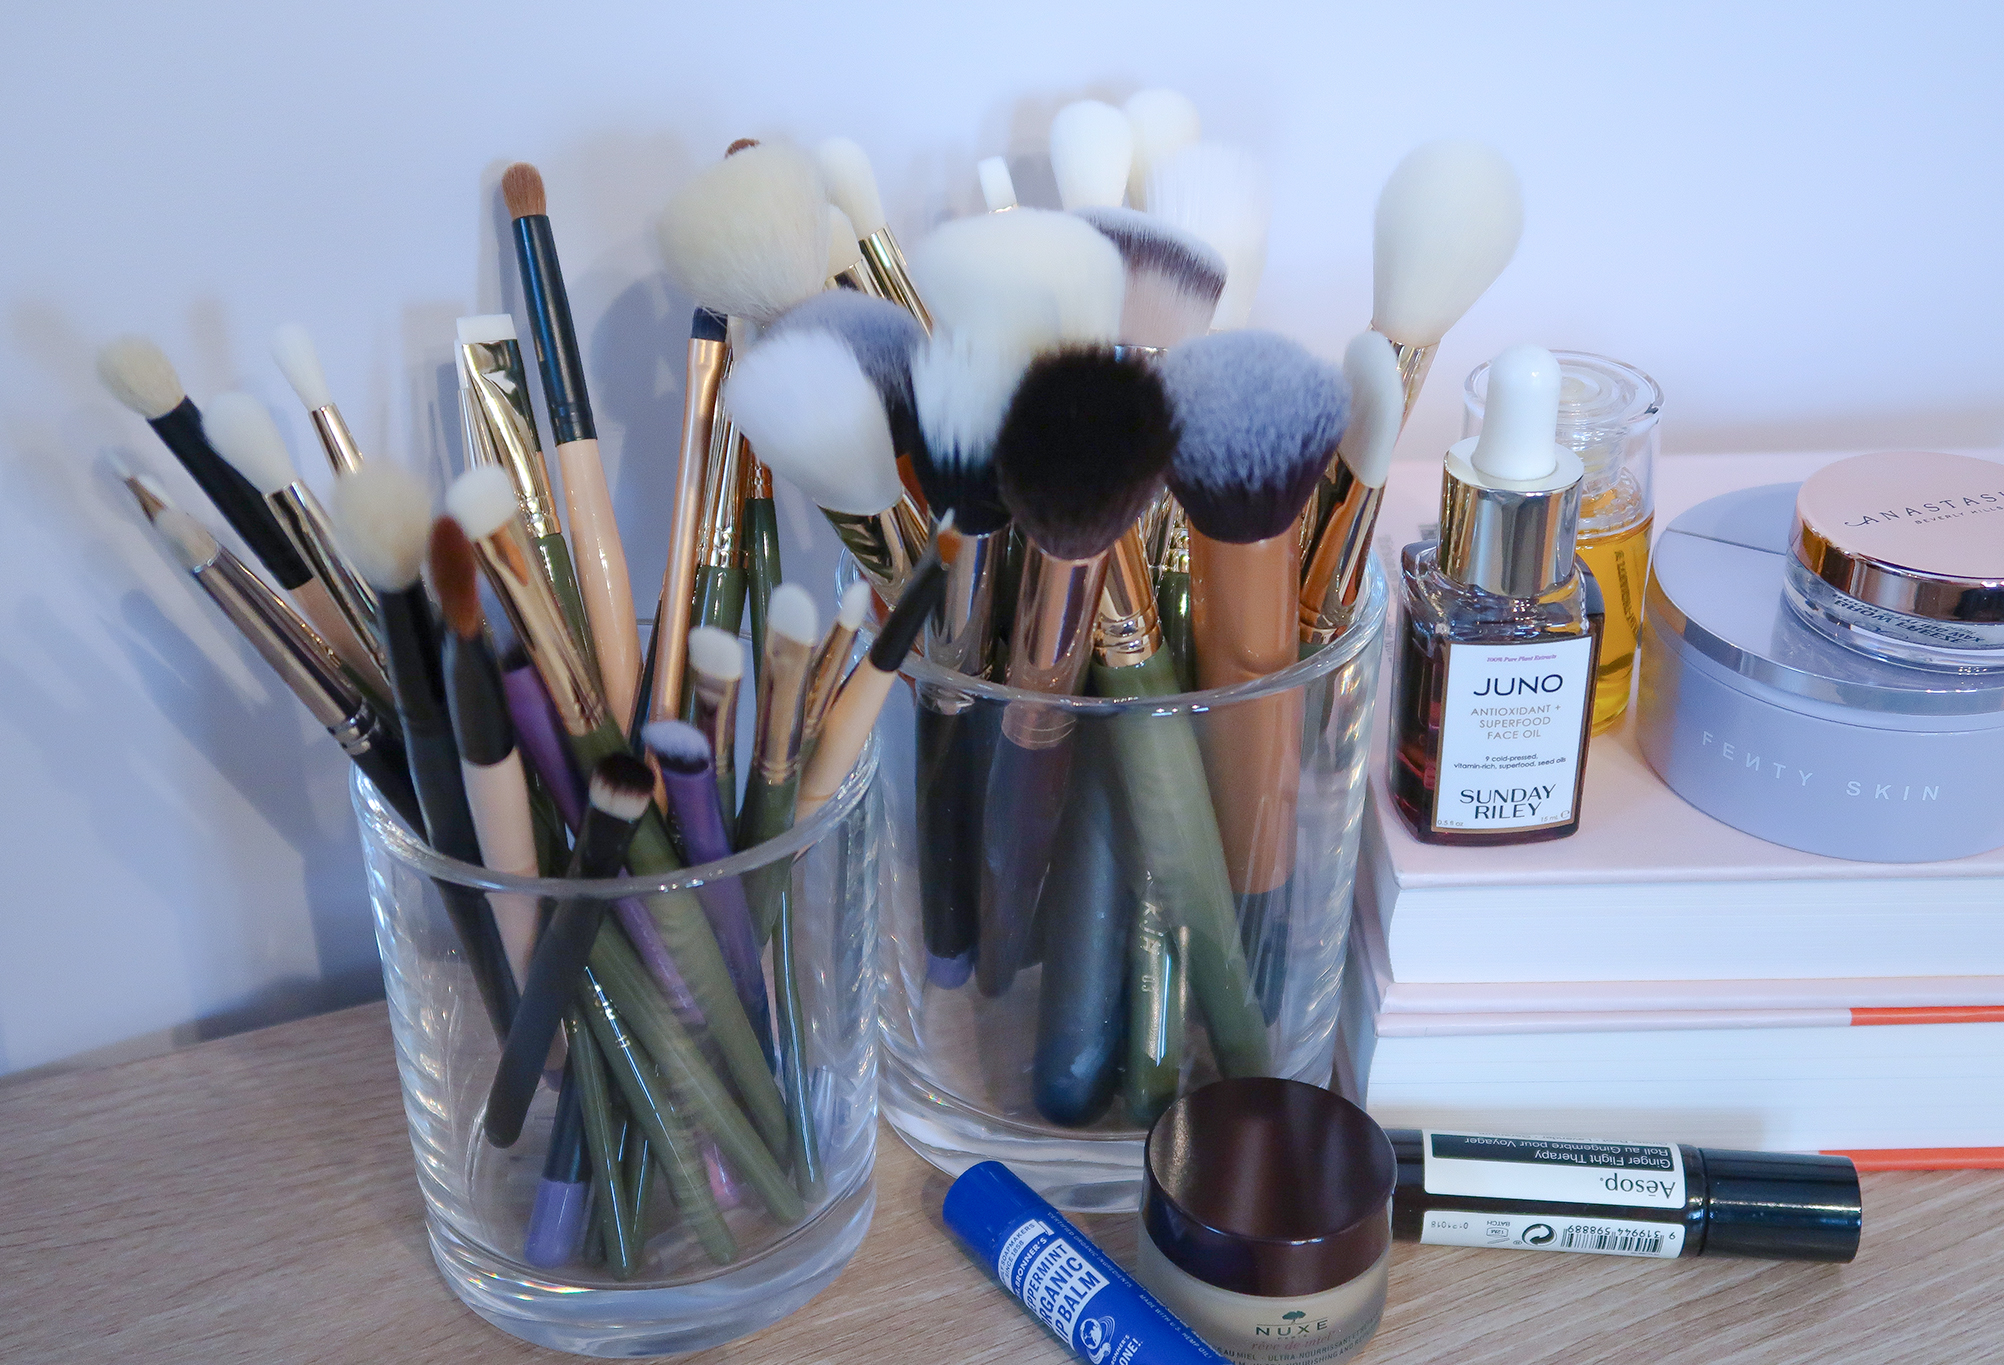 Makeup Brushes on Desk and Beauty Items